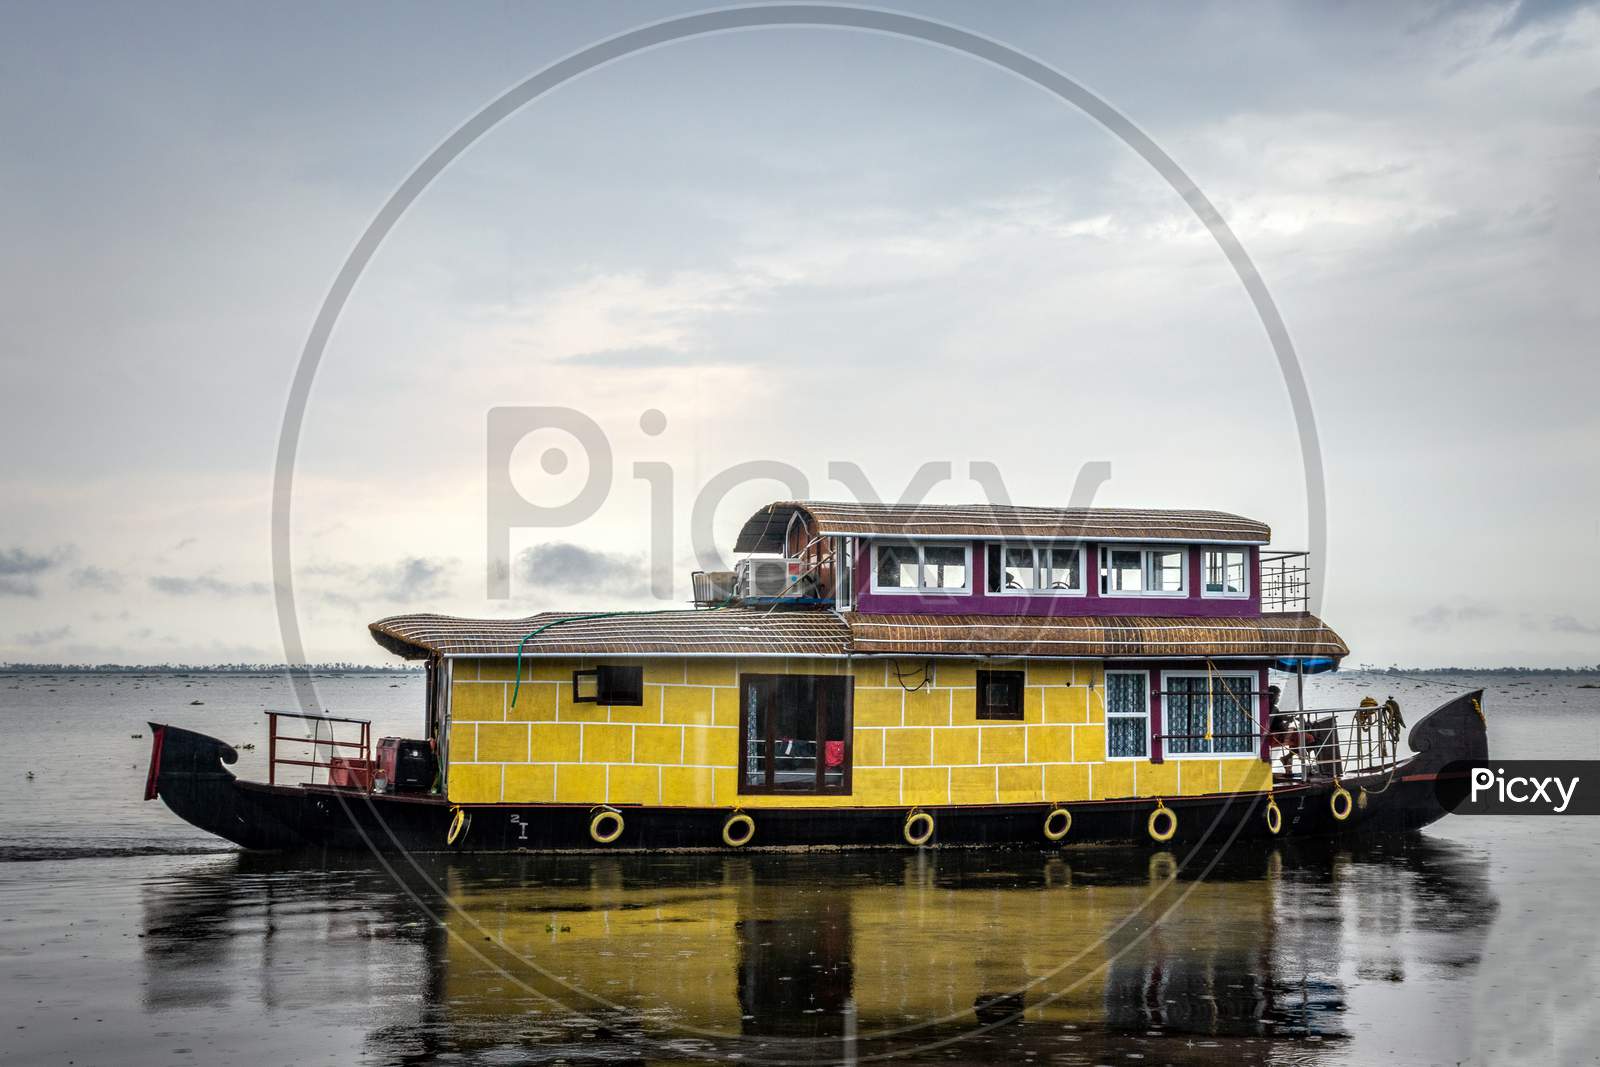 Houseboat Yellow Image With Blue Sky And Cloud